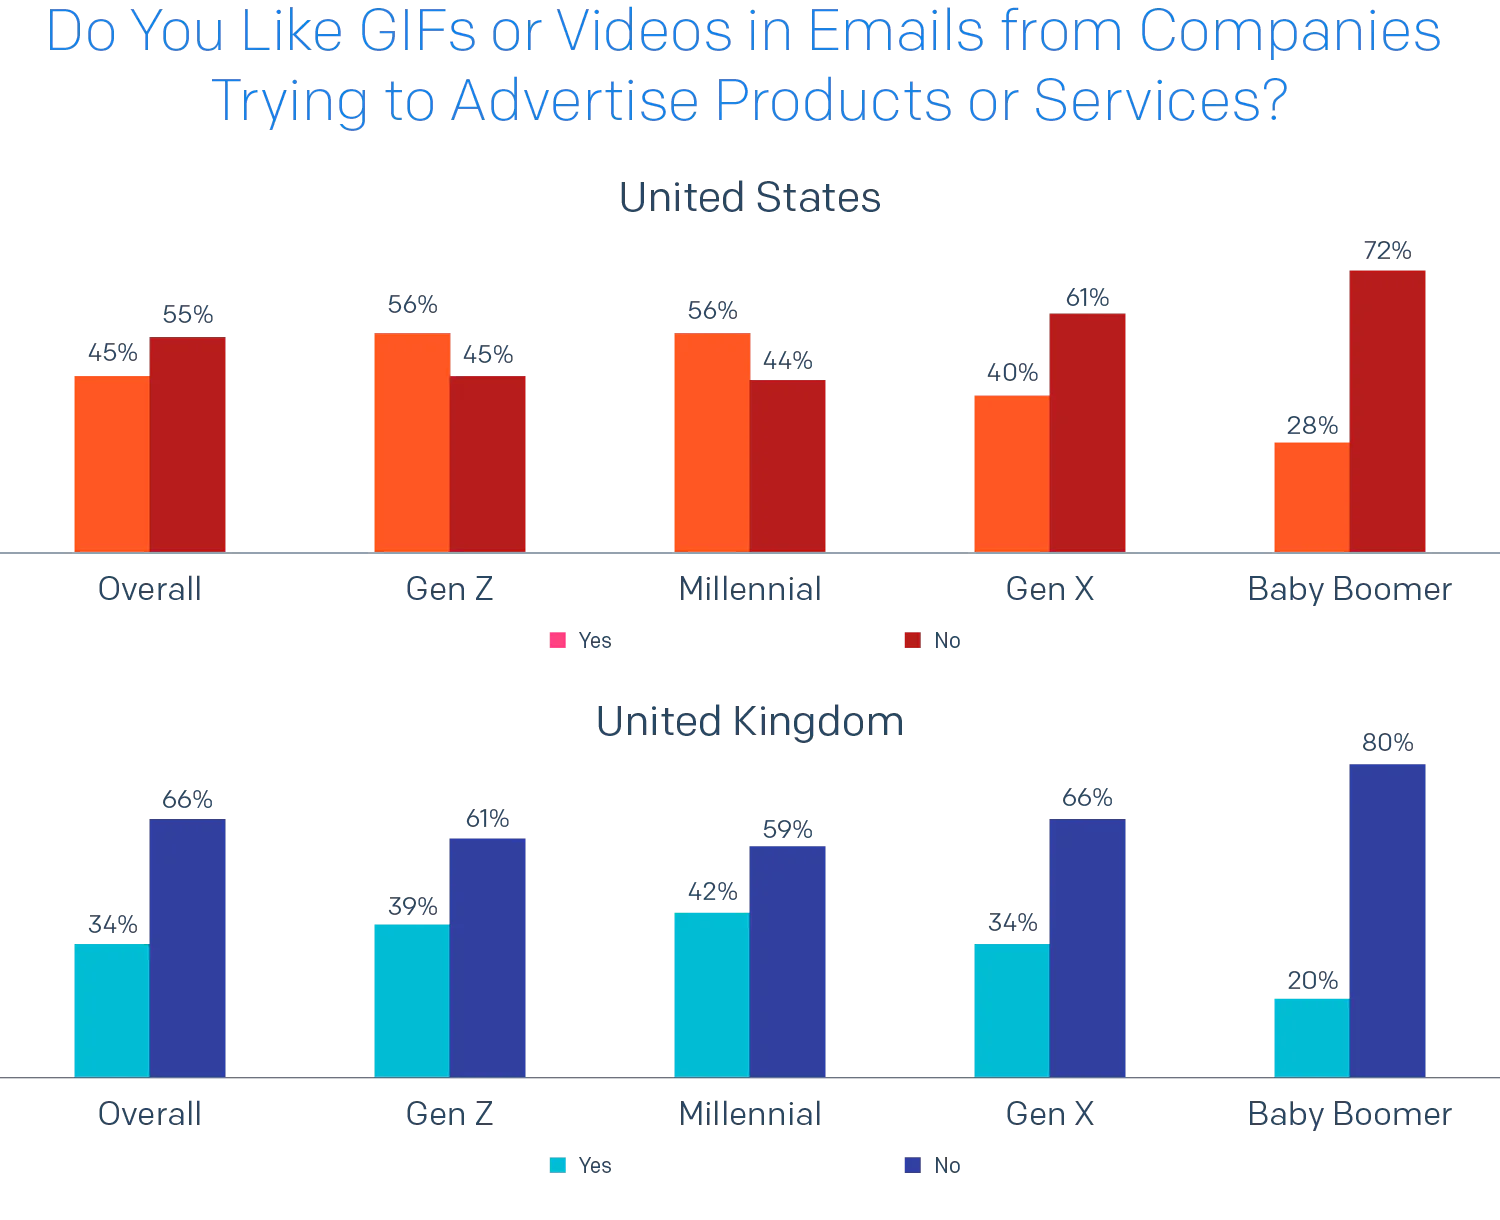 Bar chart of Do You Like GIFs or Videos in Emails from Companies Trying to Advertise Products or Services?